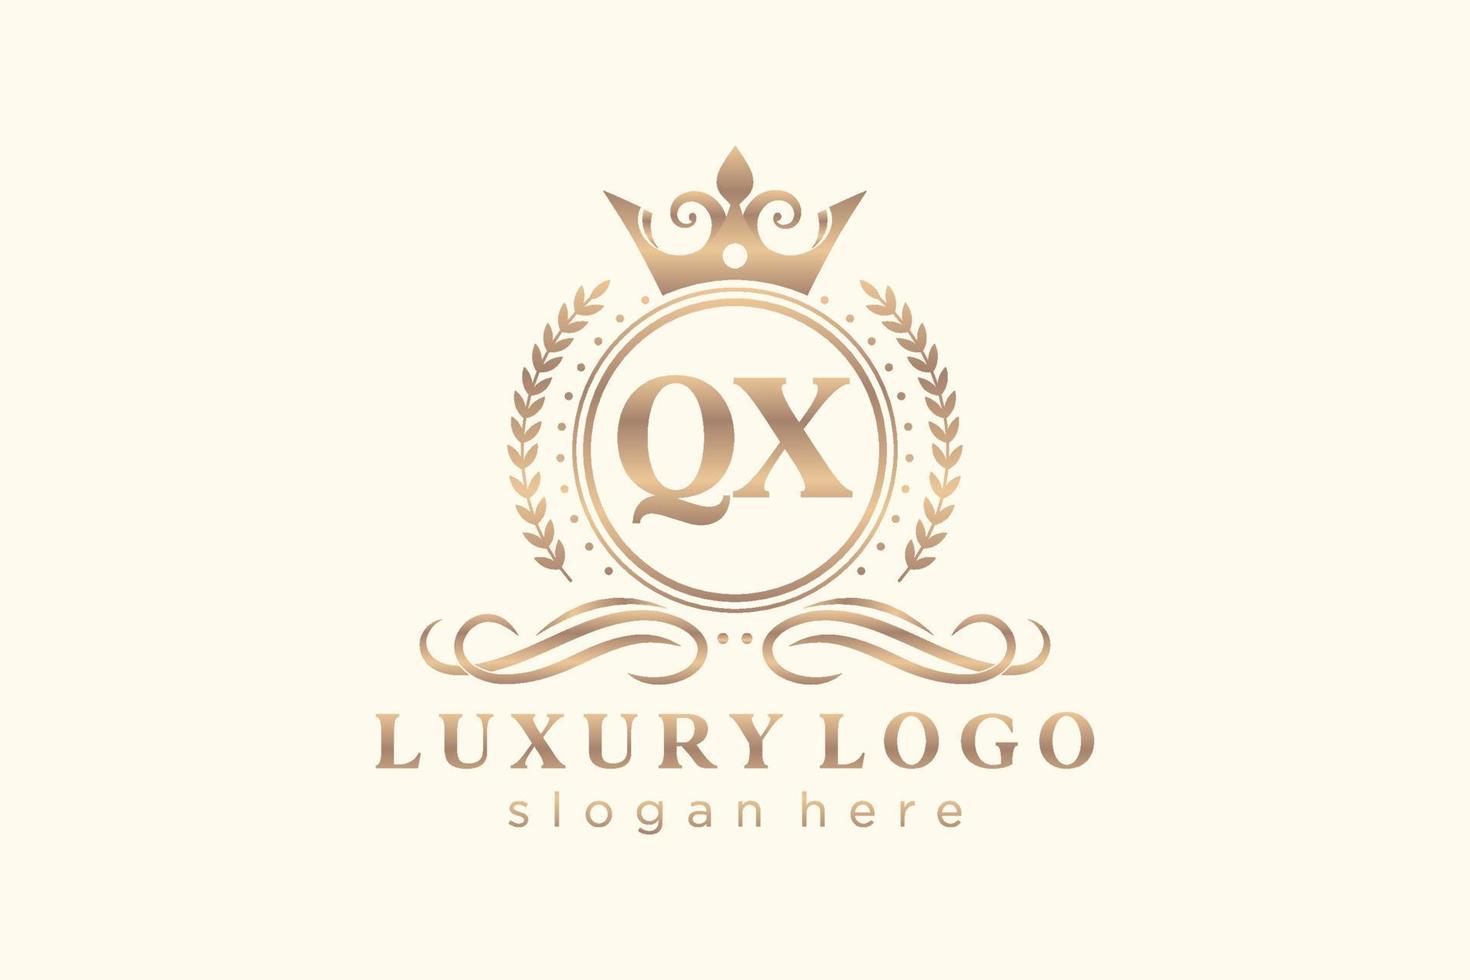 Initial QX Letter Royal Luxury Logo template in vector art for Restaurant, Royalty, Boutique, Cafe, Hotel, Heraldic, Jewelry, Fashion and other vector illustration.